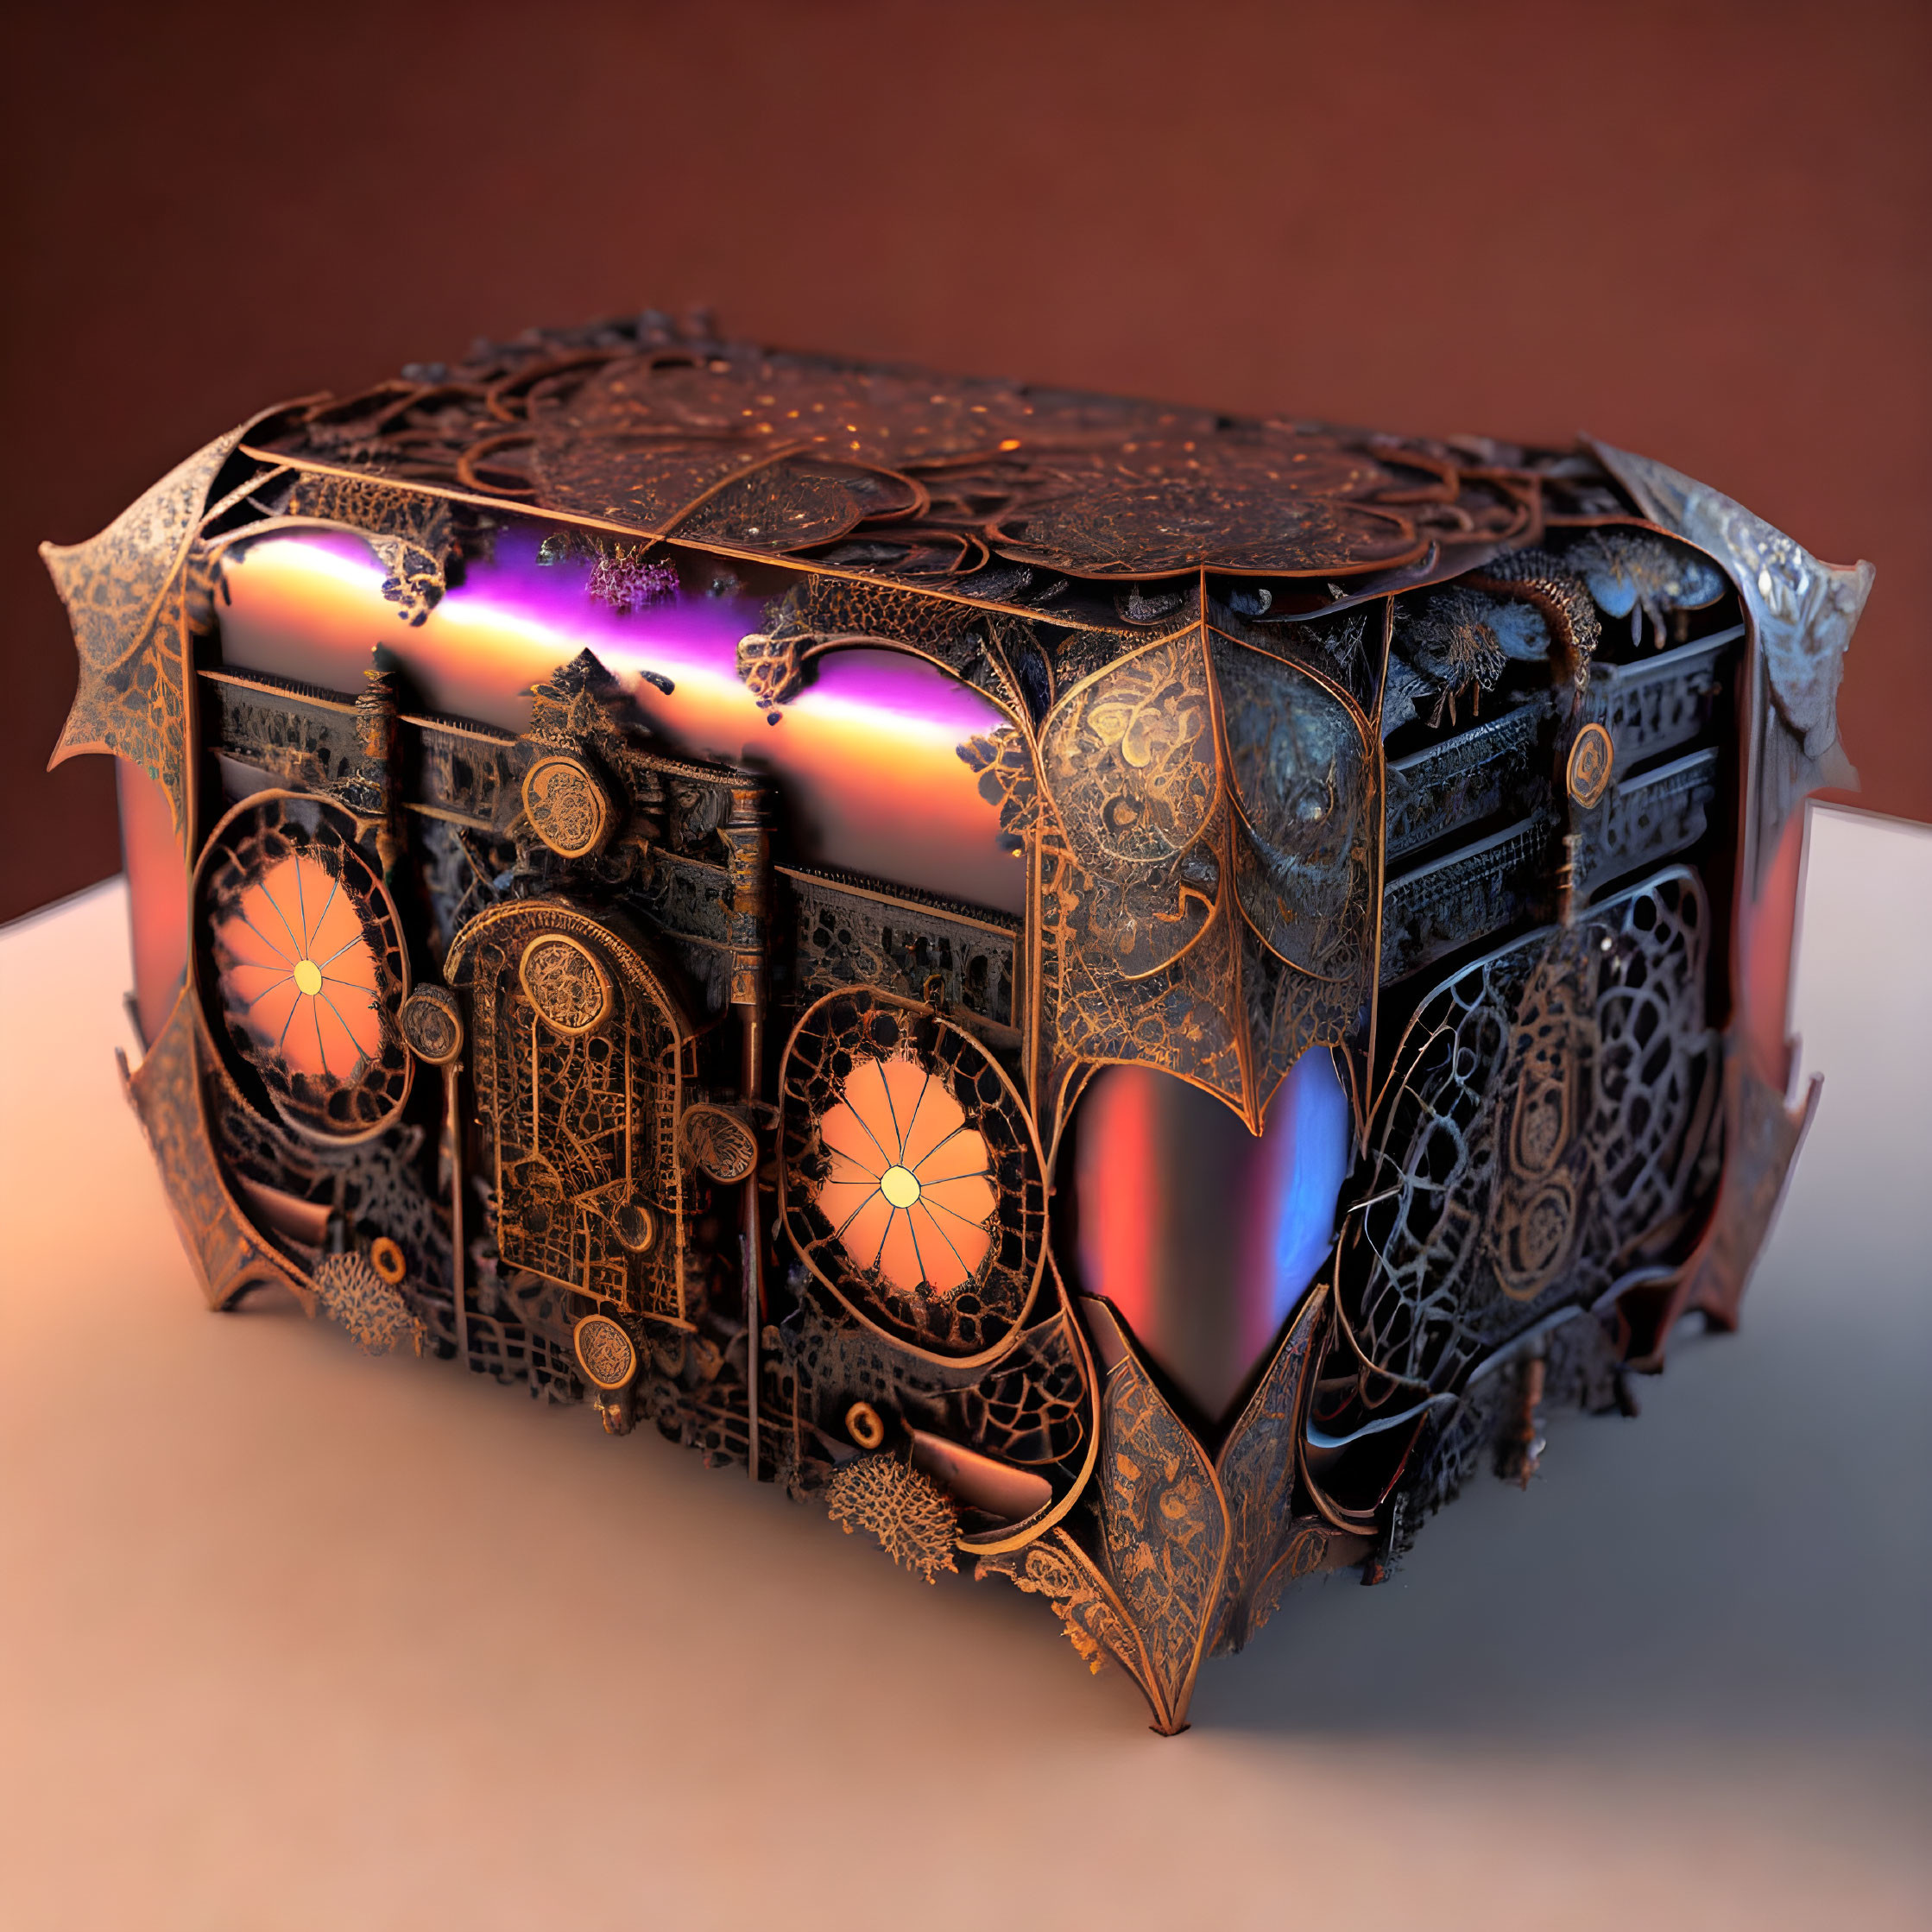 Intricate mystical chest with glowing accents on reddish-brown background